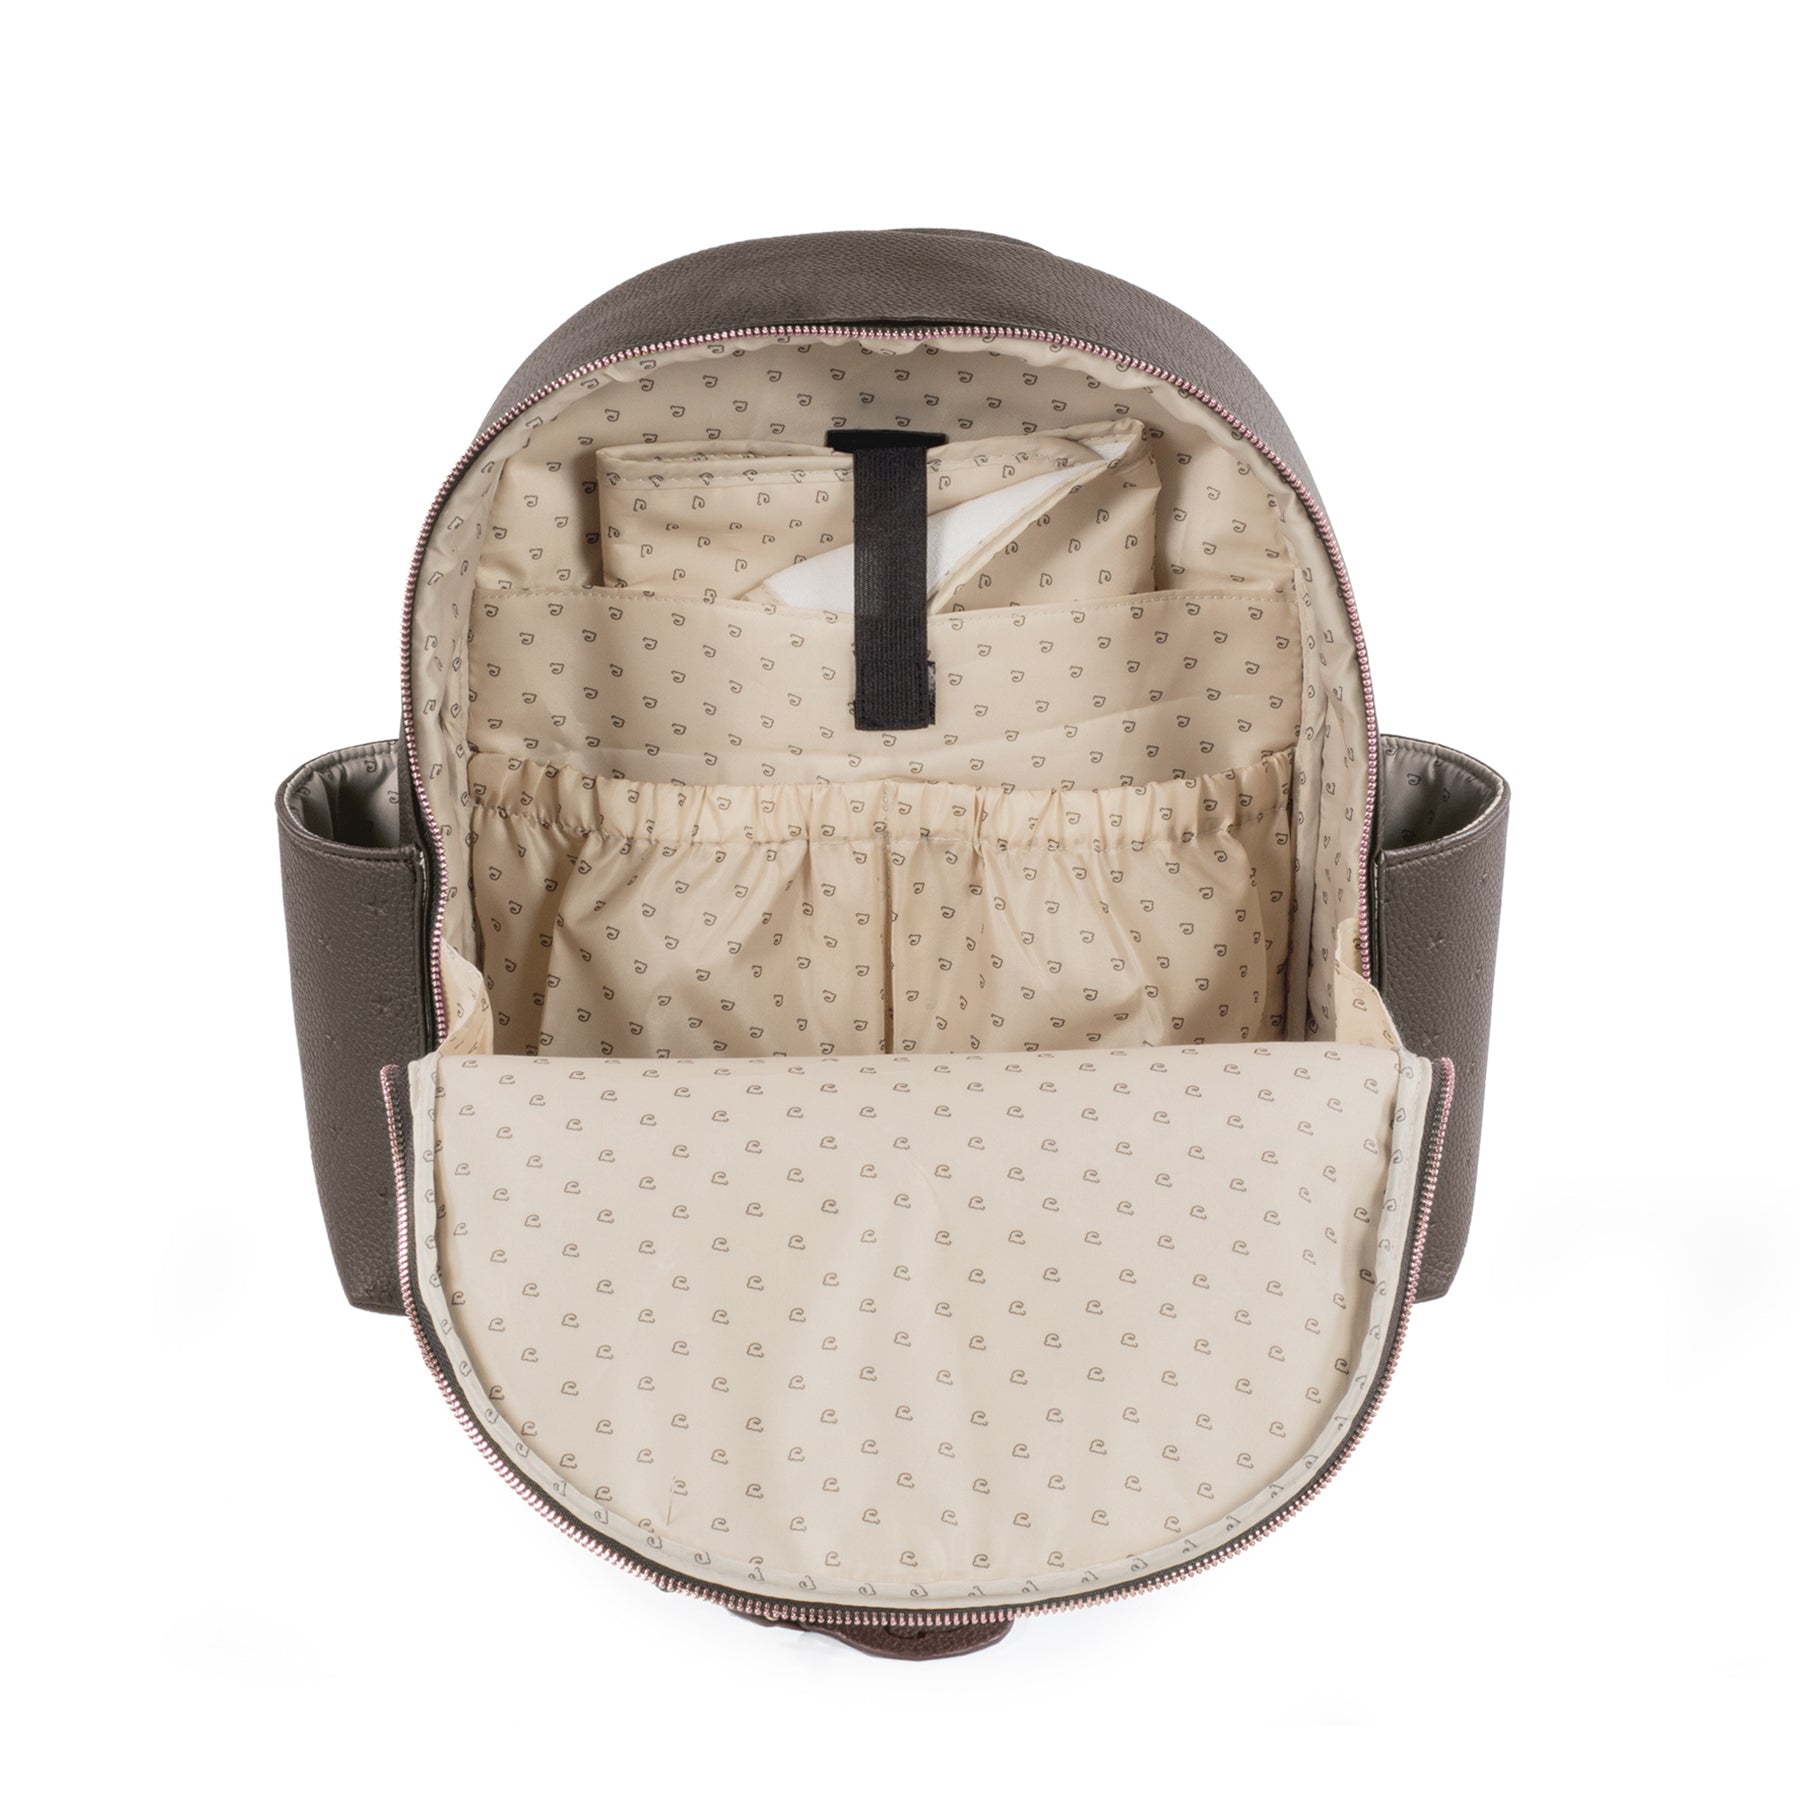 Pasito a Pasito London Coffee Backpack Diaper Changing Bag